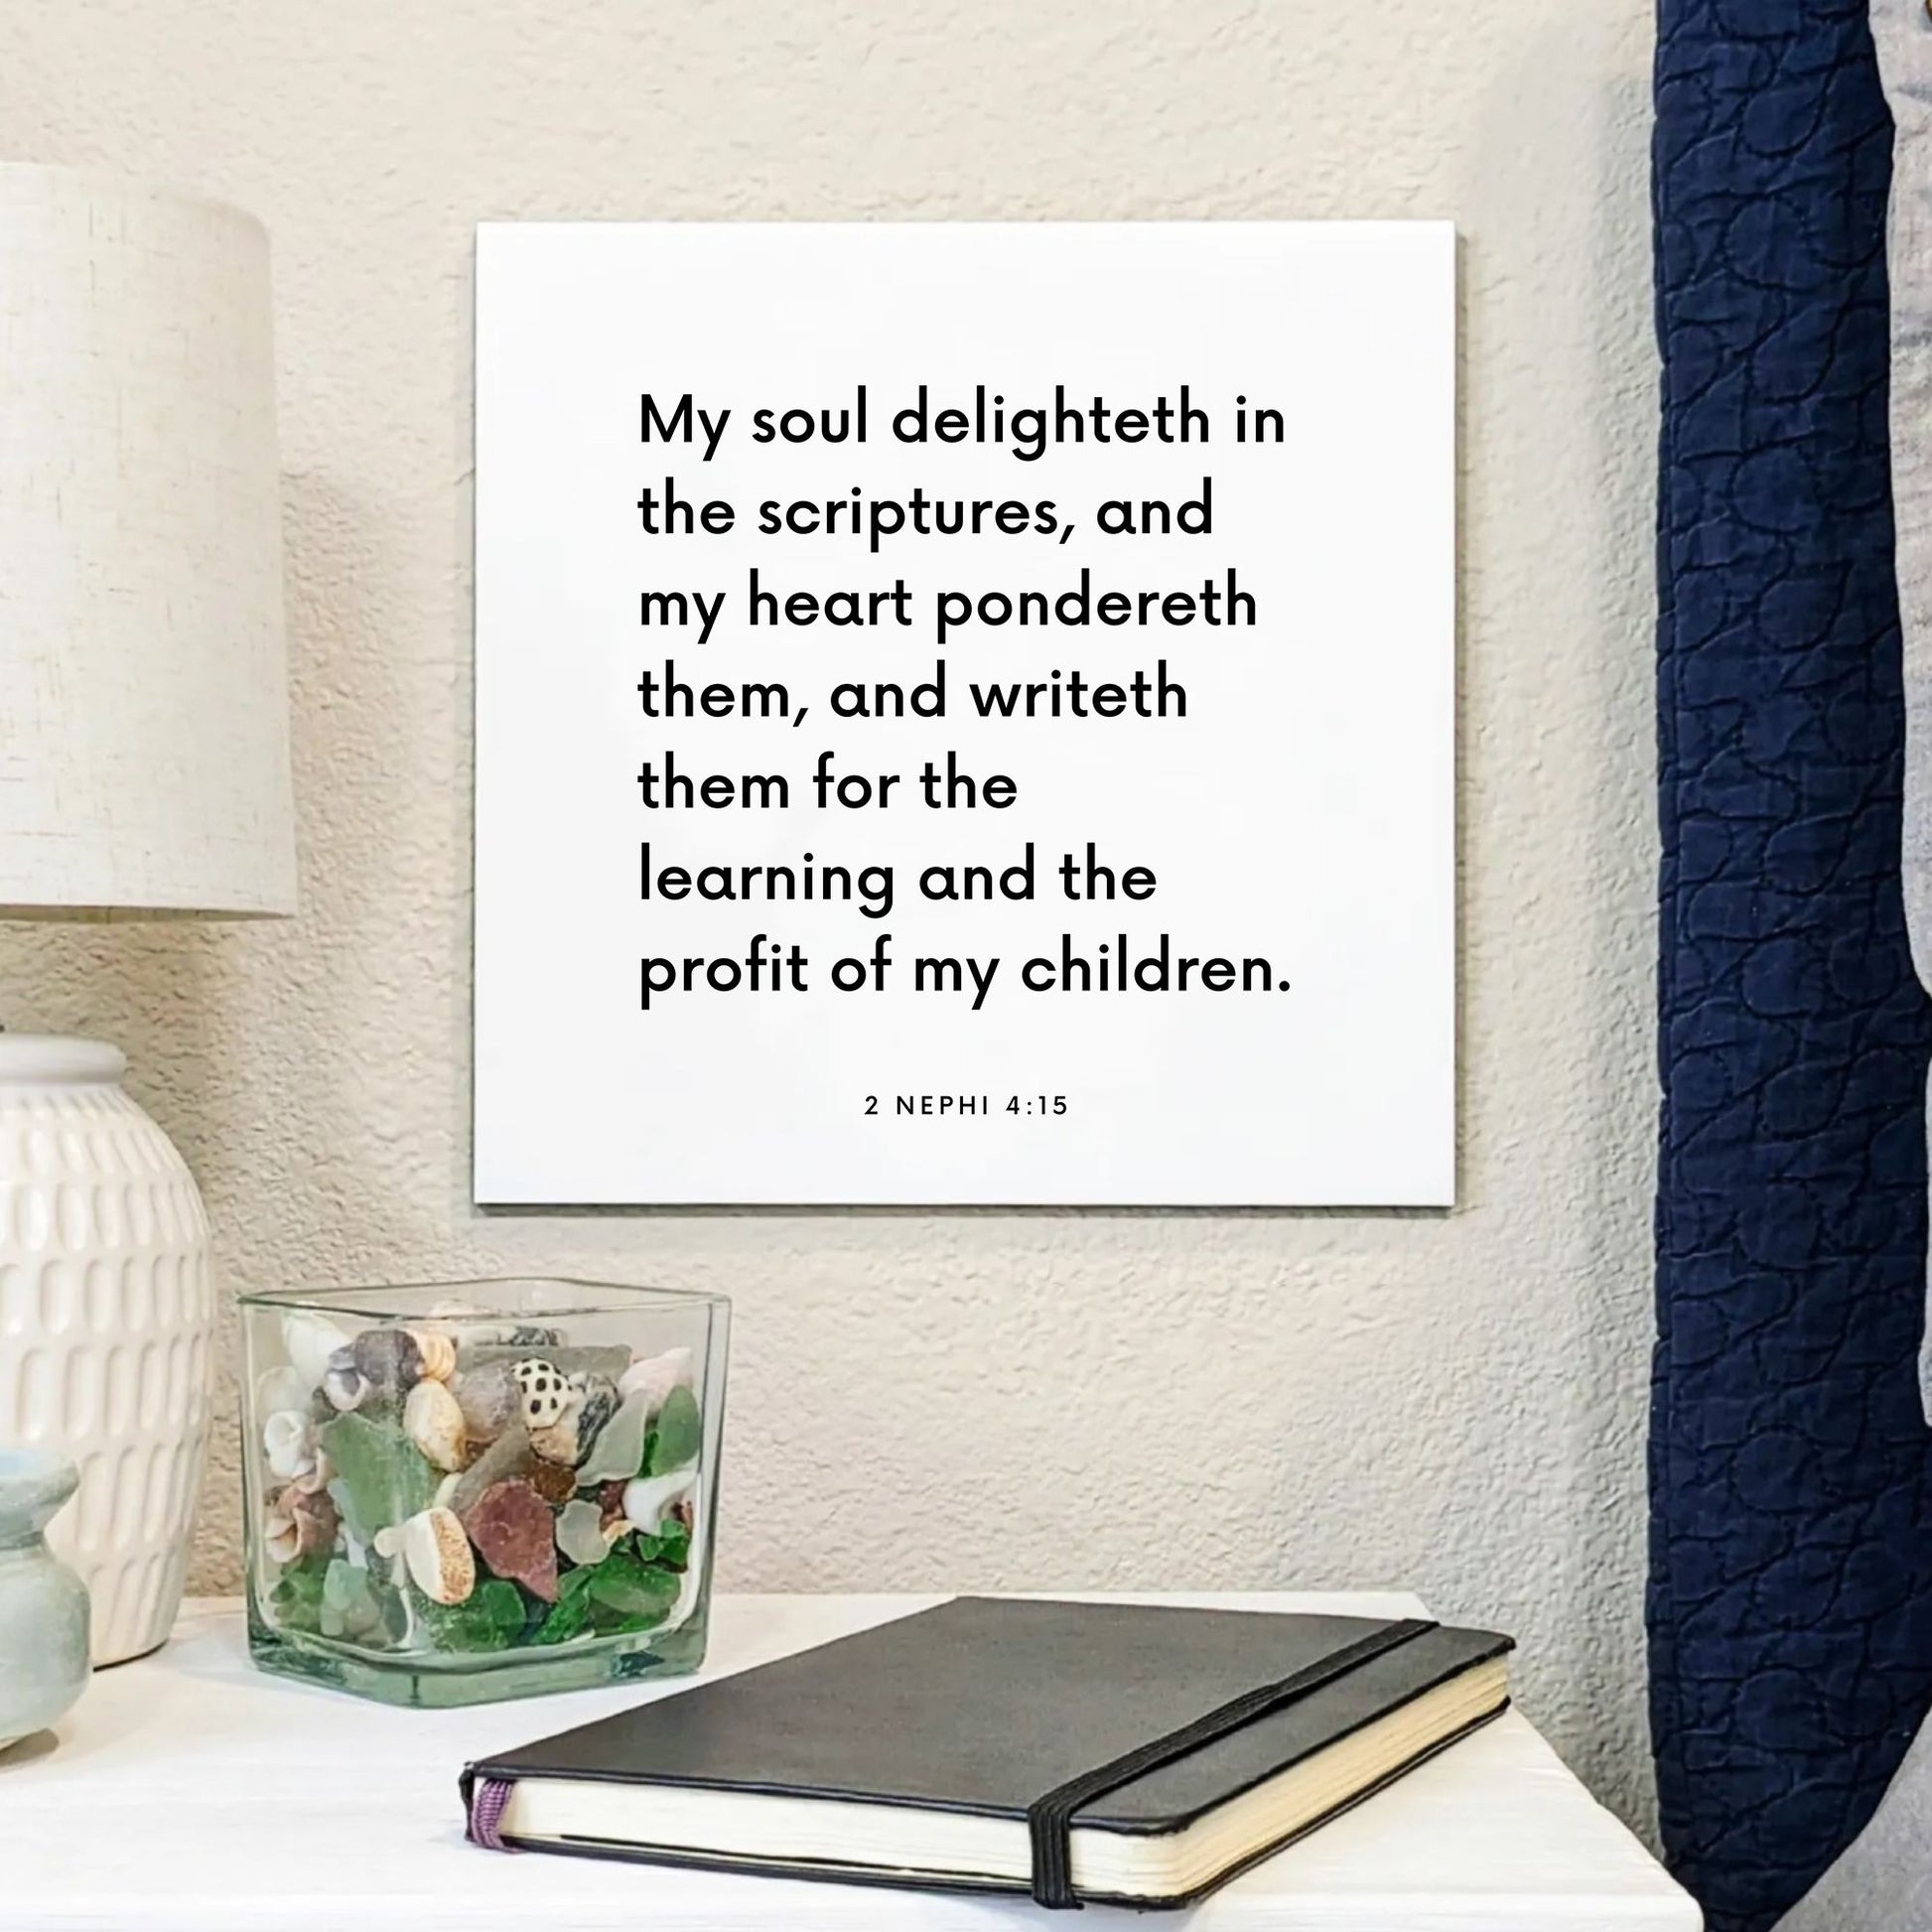 Bedside mouting of the scripture tile for 2 Nephi 4:15 - "My soul delighteth in the scriptures"